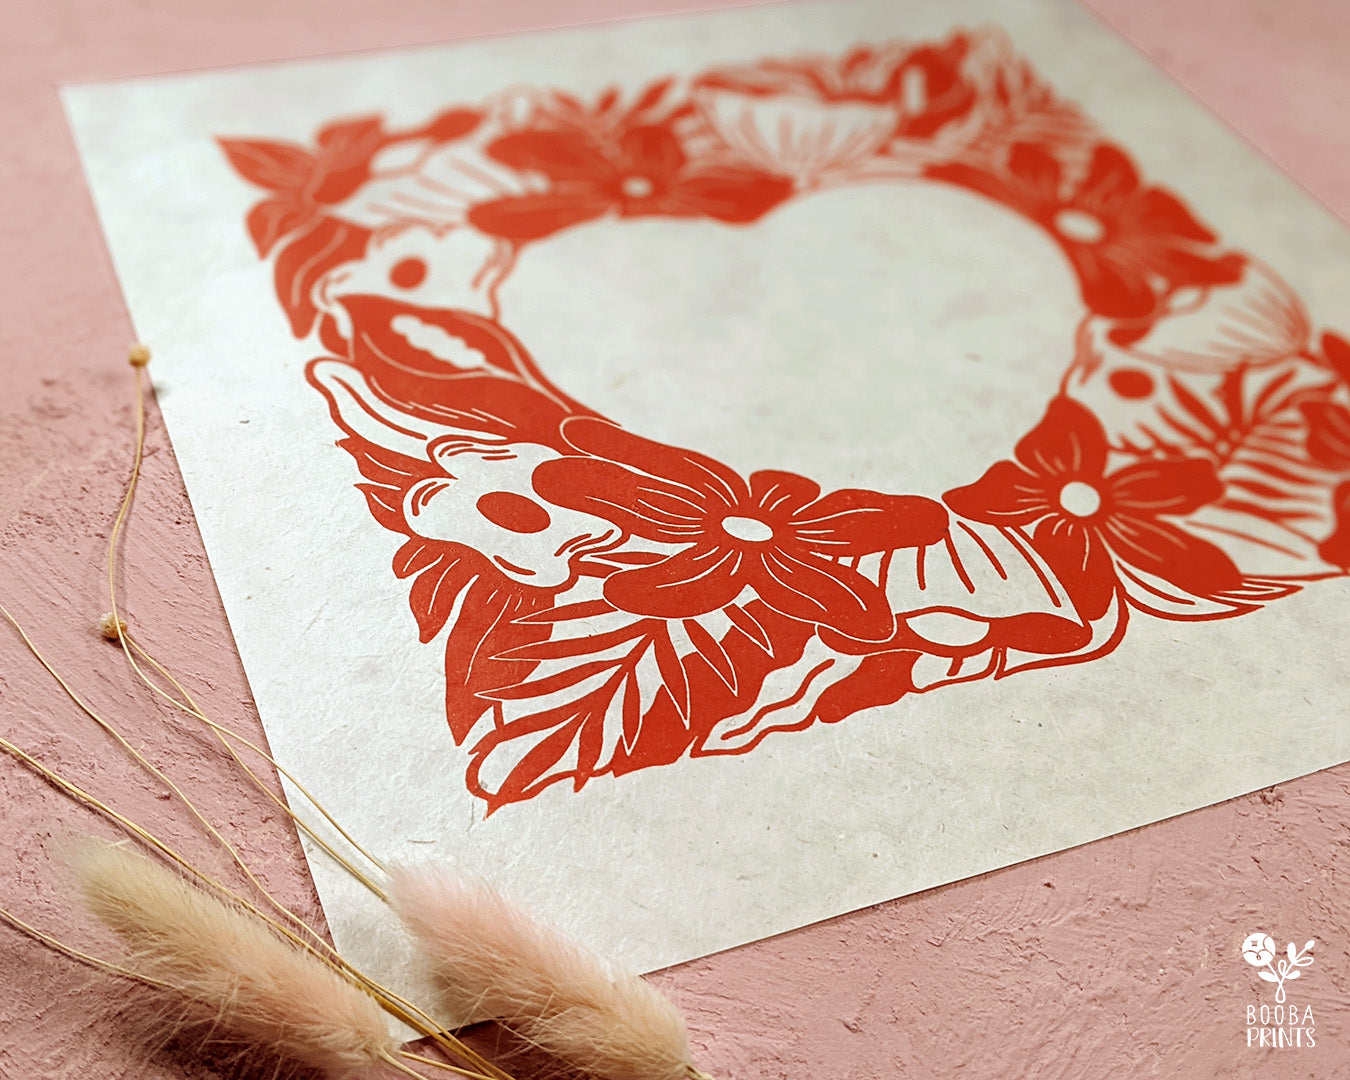 Valentine's Day Floral Heart Linocut Print 💖 • Art By Booba Prints